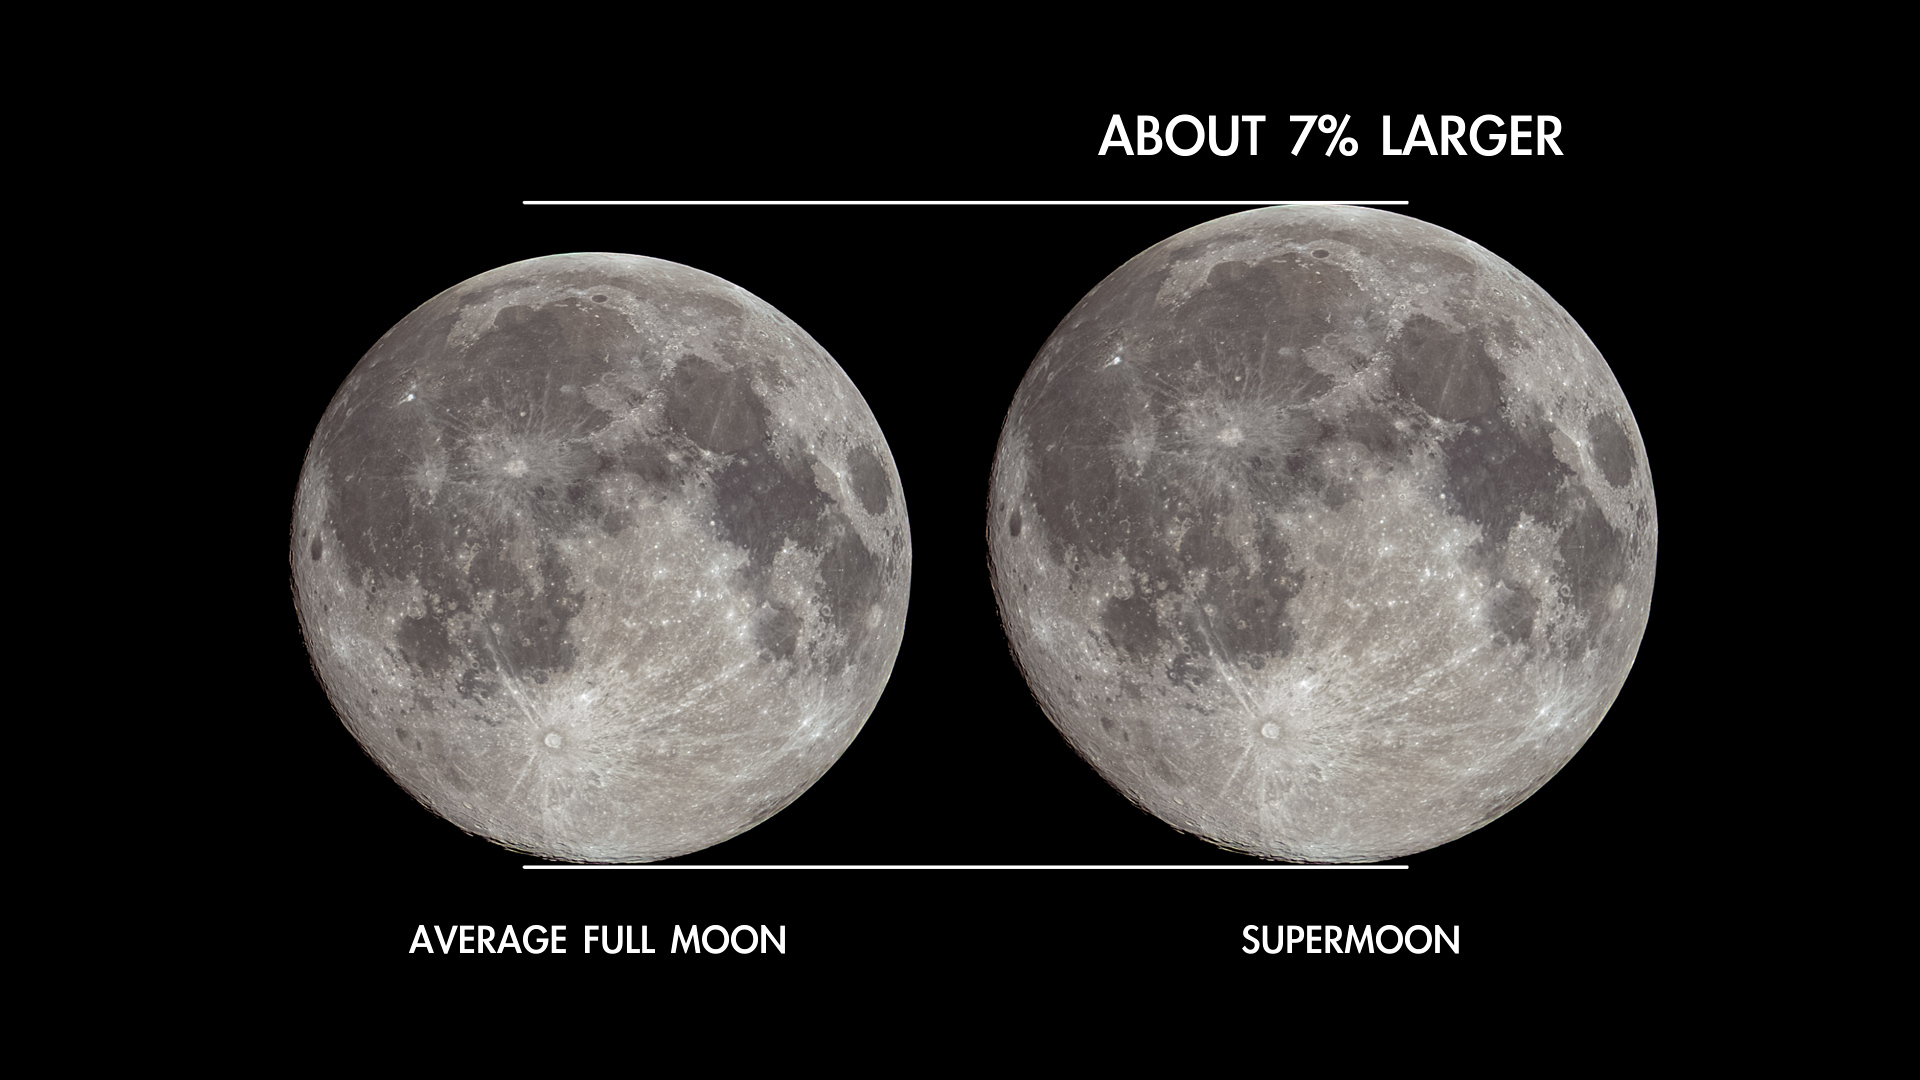 Two photos of a full moon are presented, side by side. They are identical, except that the one on the left (labeled "average full moon") is a little bit smaller than the one at right (labeled "supermoon"). The moons appear between a pair of thin lines at their top and bottom, which show the difference in their sizes is about 7%.